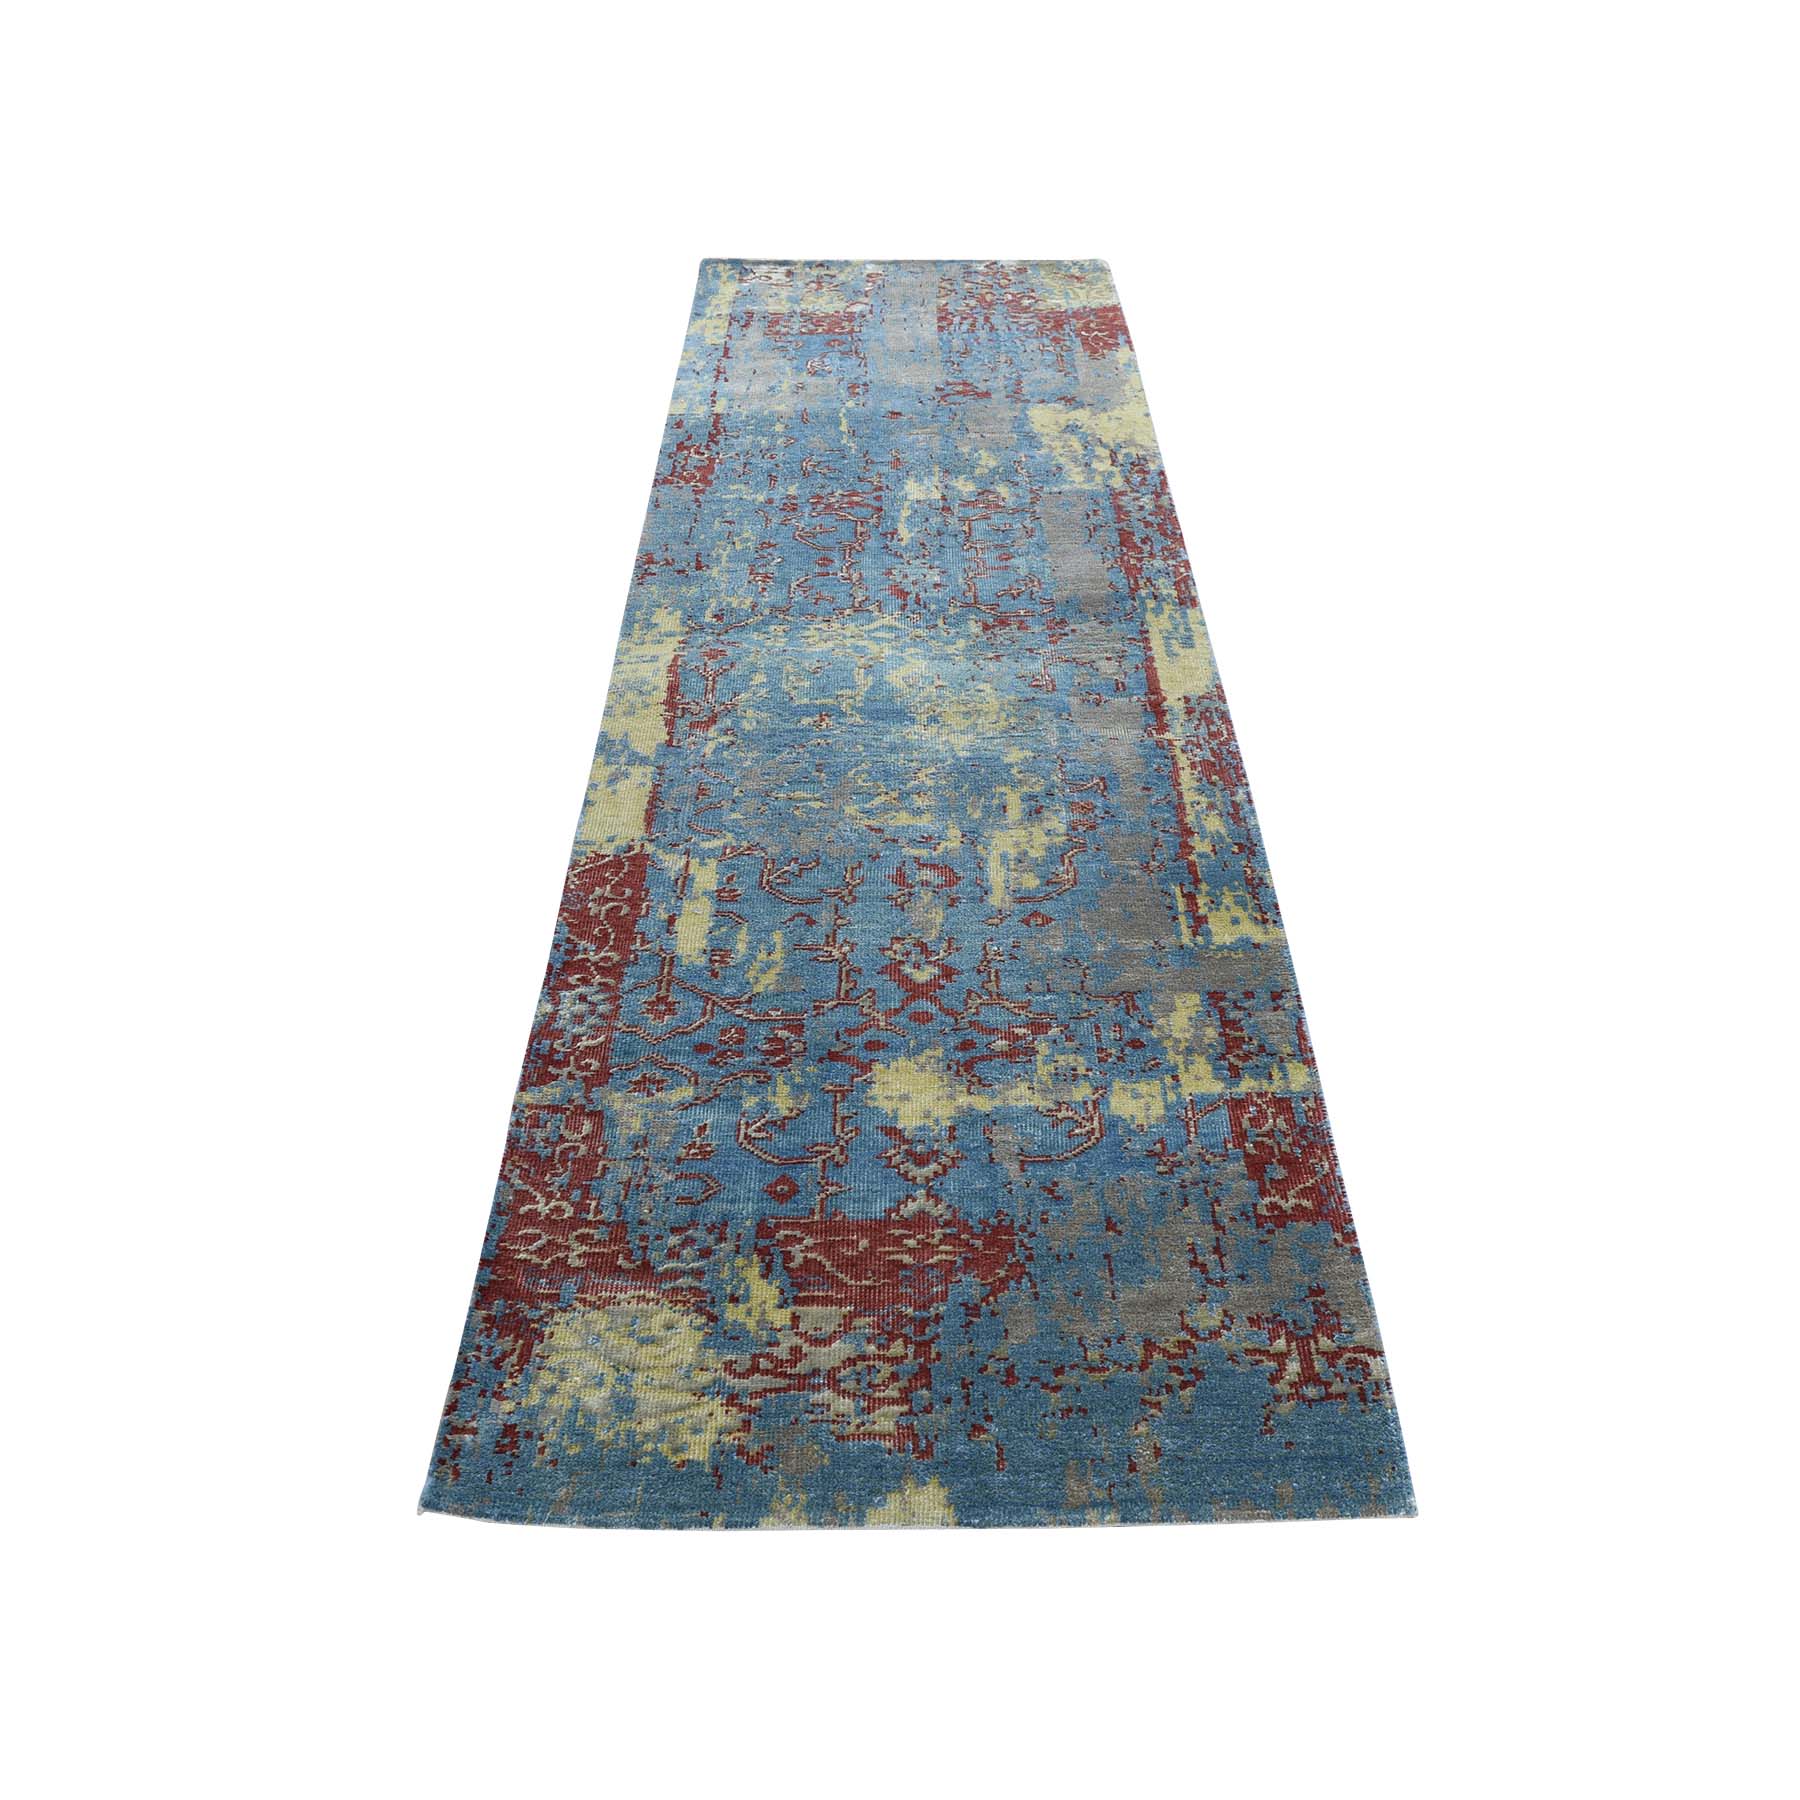 2-5 x7-10  Hand-Knotted Silk With Oxidized Wool Broken Design Rug 